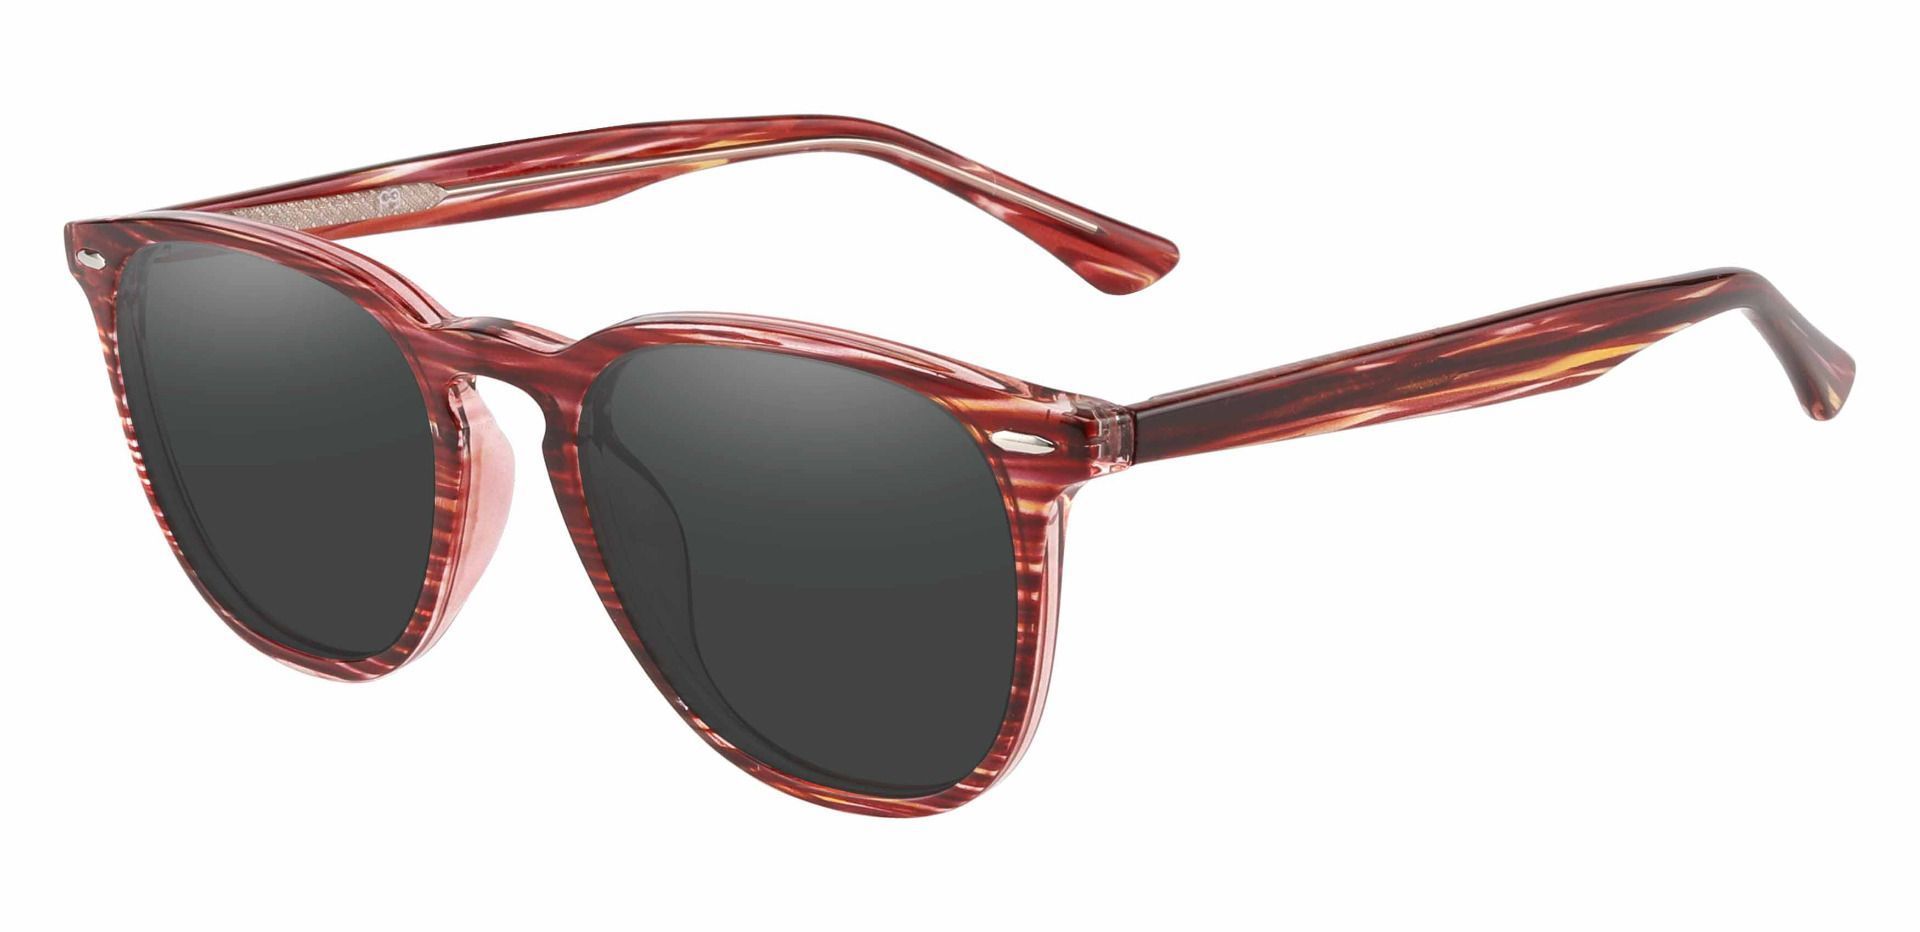 Sycamore Oval Lined Bifocal Sunglasses - Red Frame With Gray Lenses